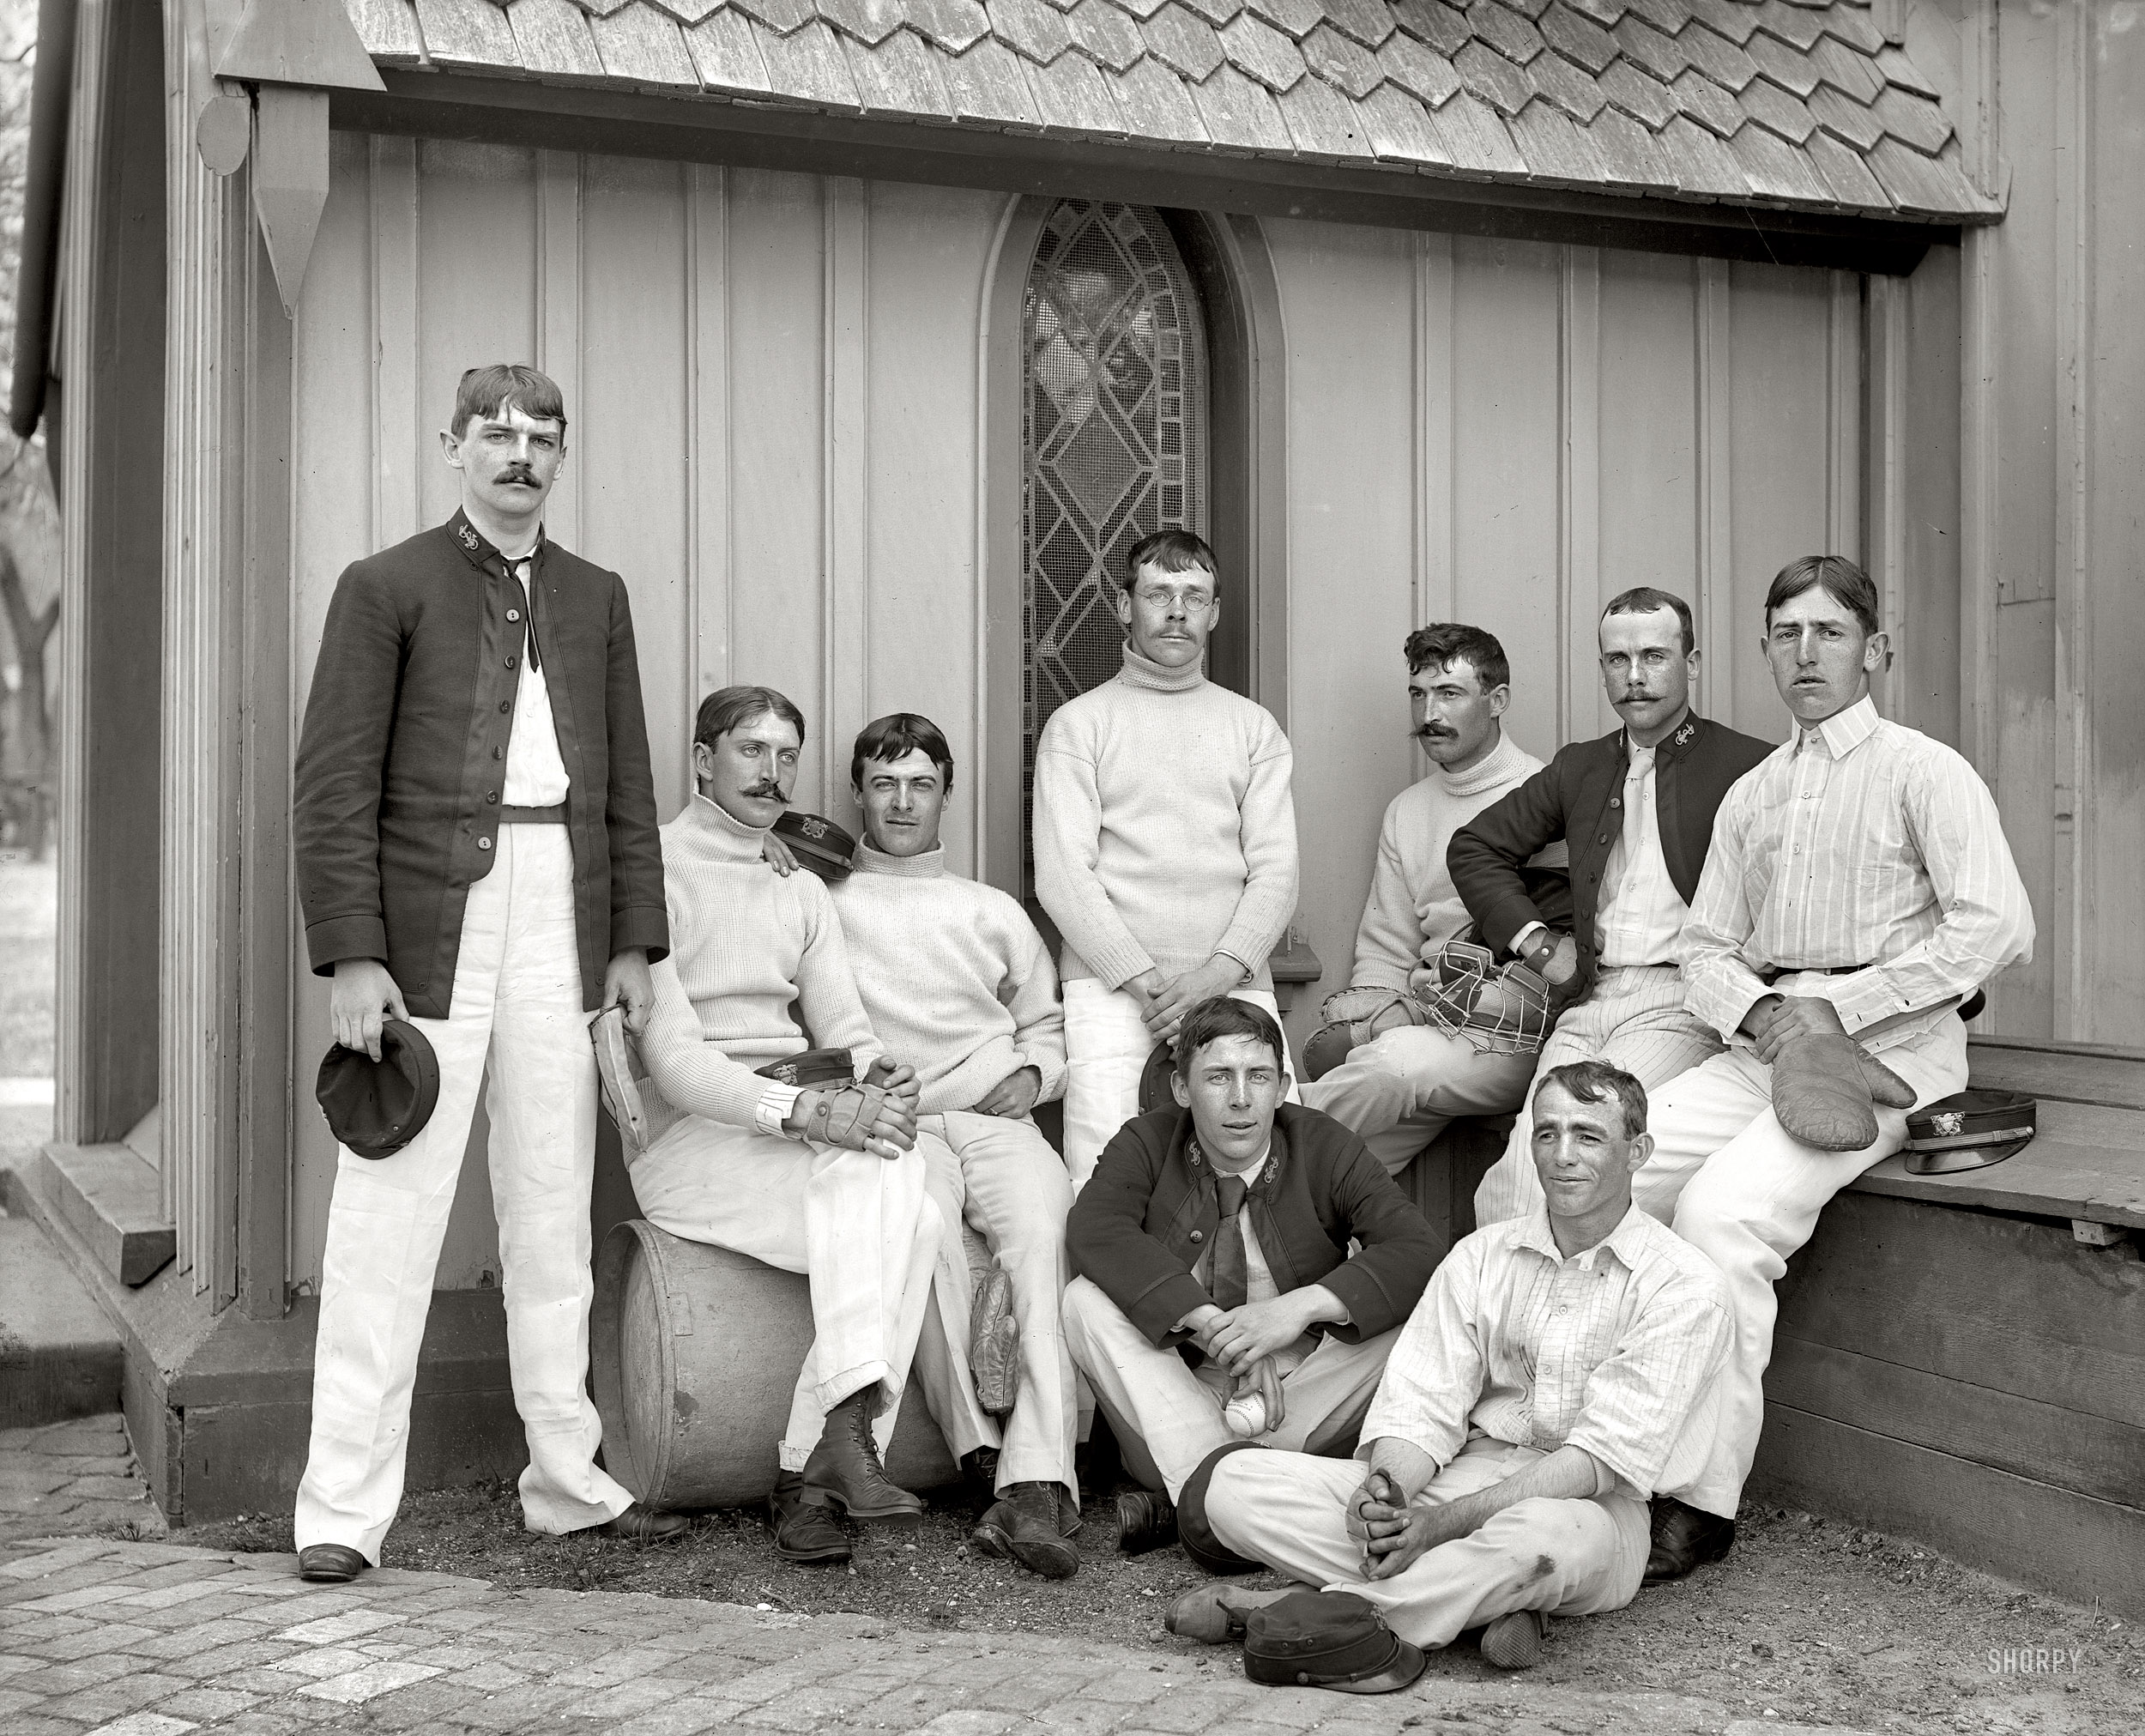 Circa 1890s. "Base ball team, U.S. Naval Academy." Go Annapolis! 8x10 inch dry plate glass negative, Detroit Publishing Company. View full size.